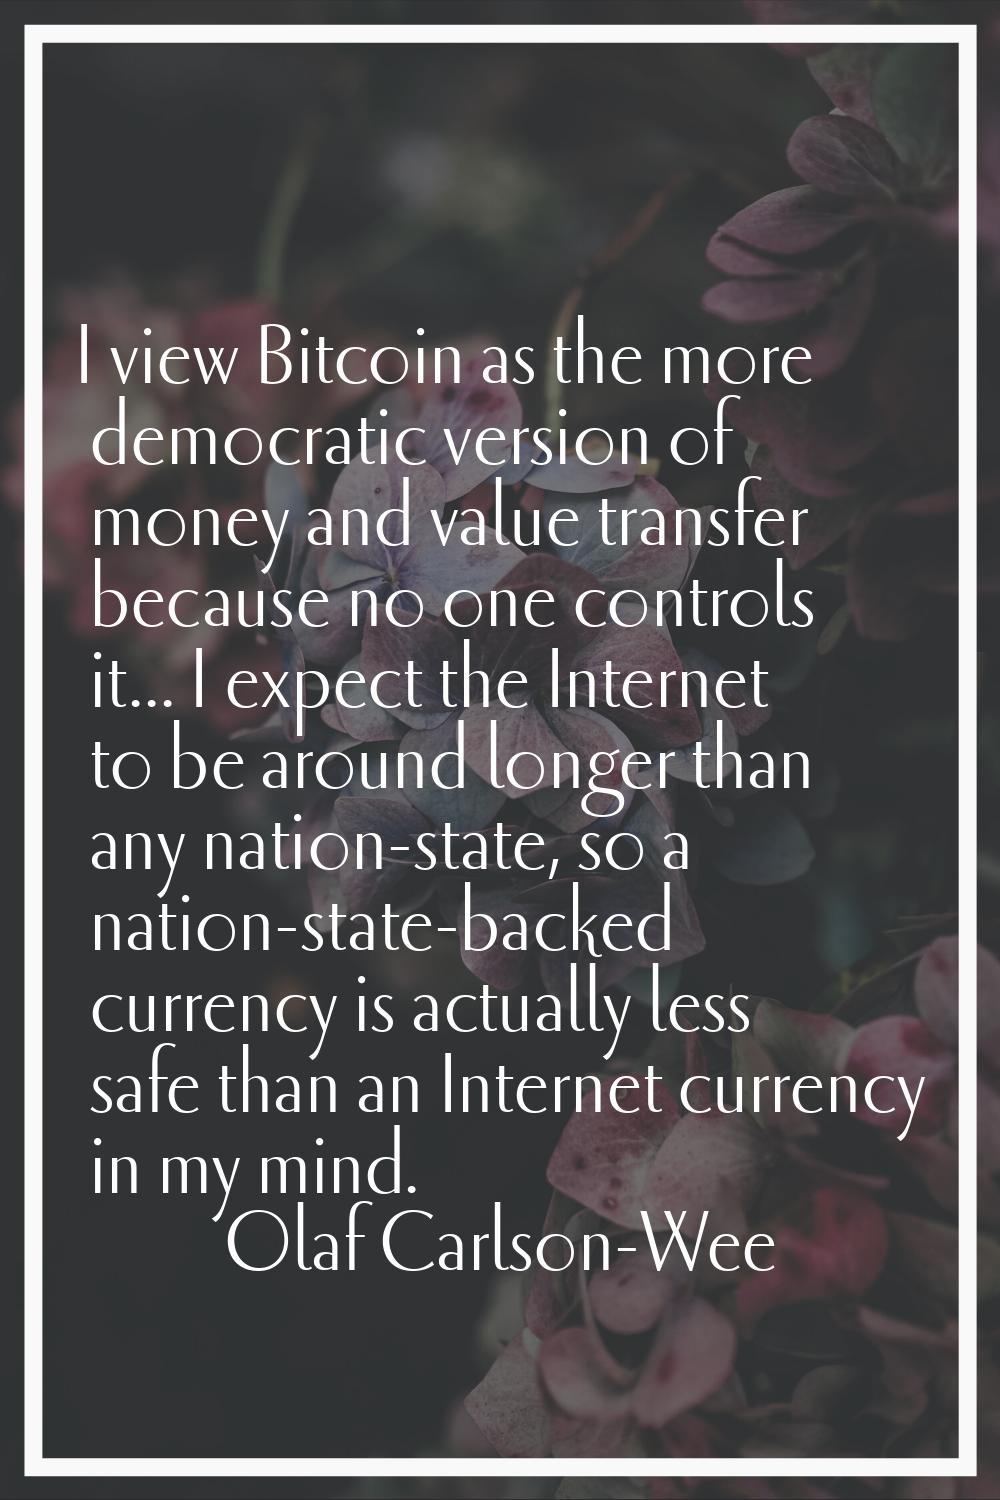 I view Bitcoin as the more democratic version of money and value transfer because no one controls i